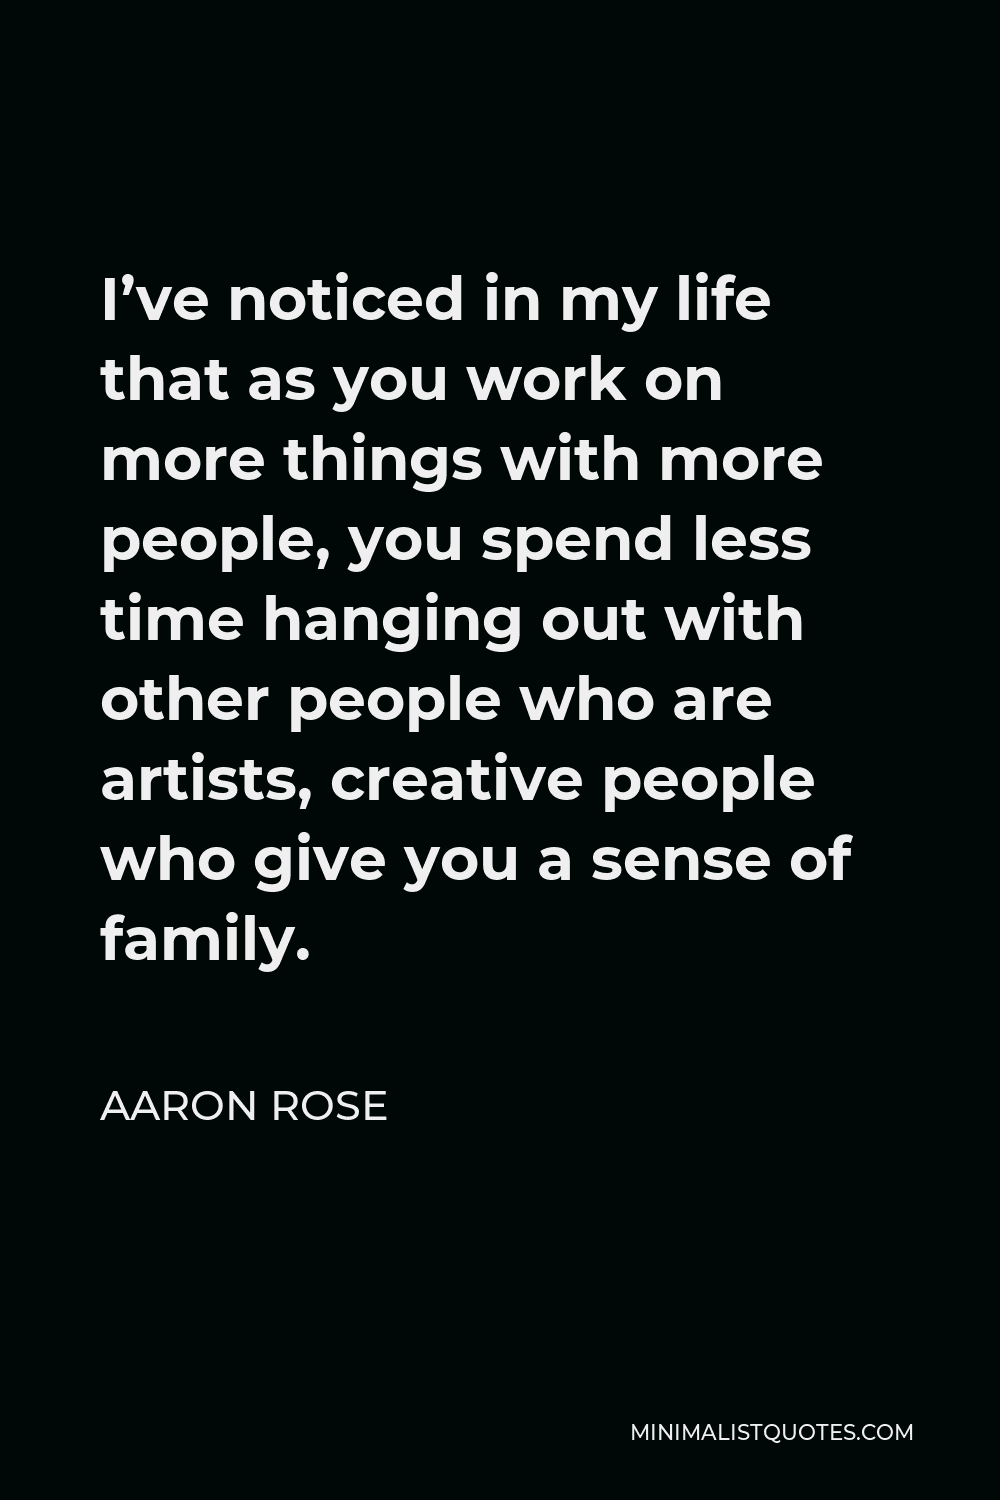 Aaron Rose Quote - I’ve noticed in my life that as you work on more things with more people, you spend less time hanging out with other people who are artists, creative people who give you a sense of family.